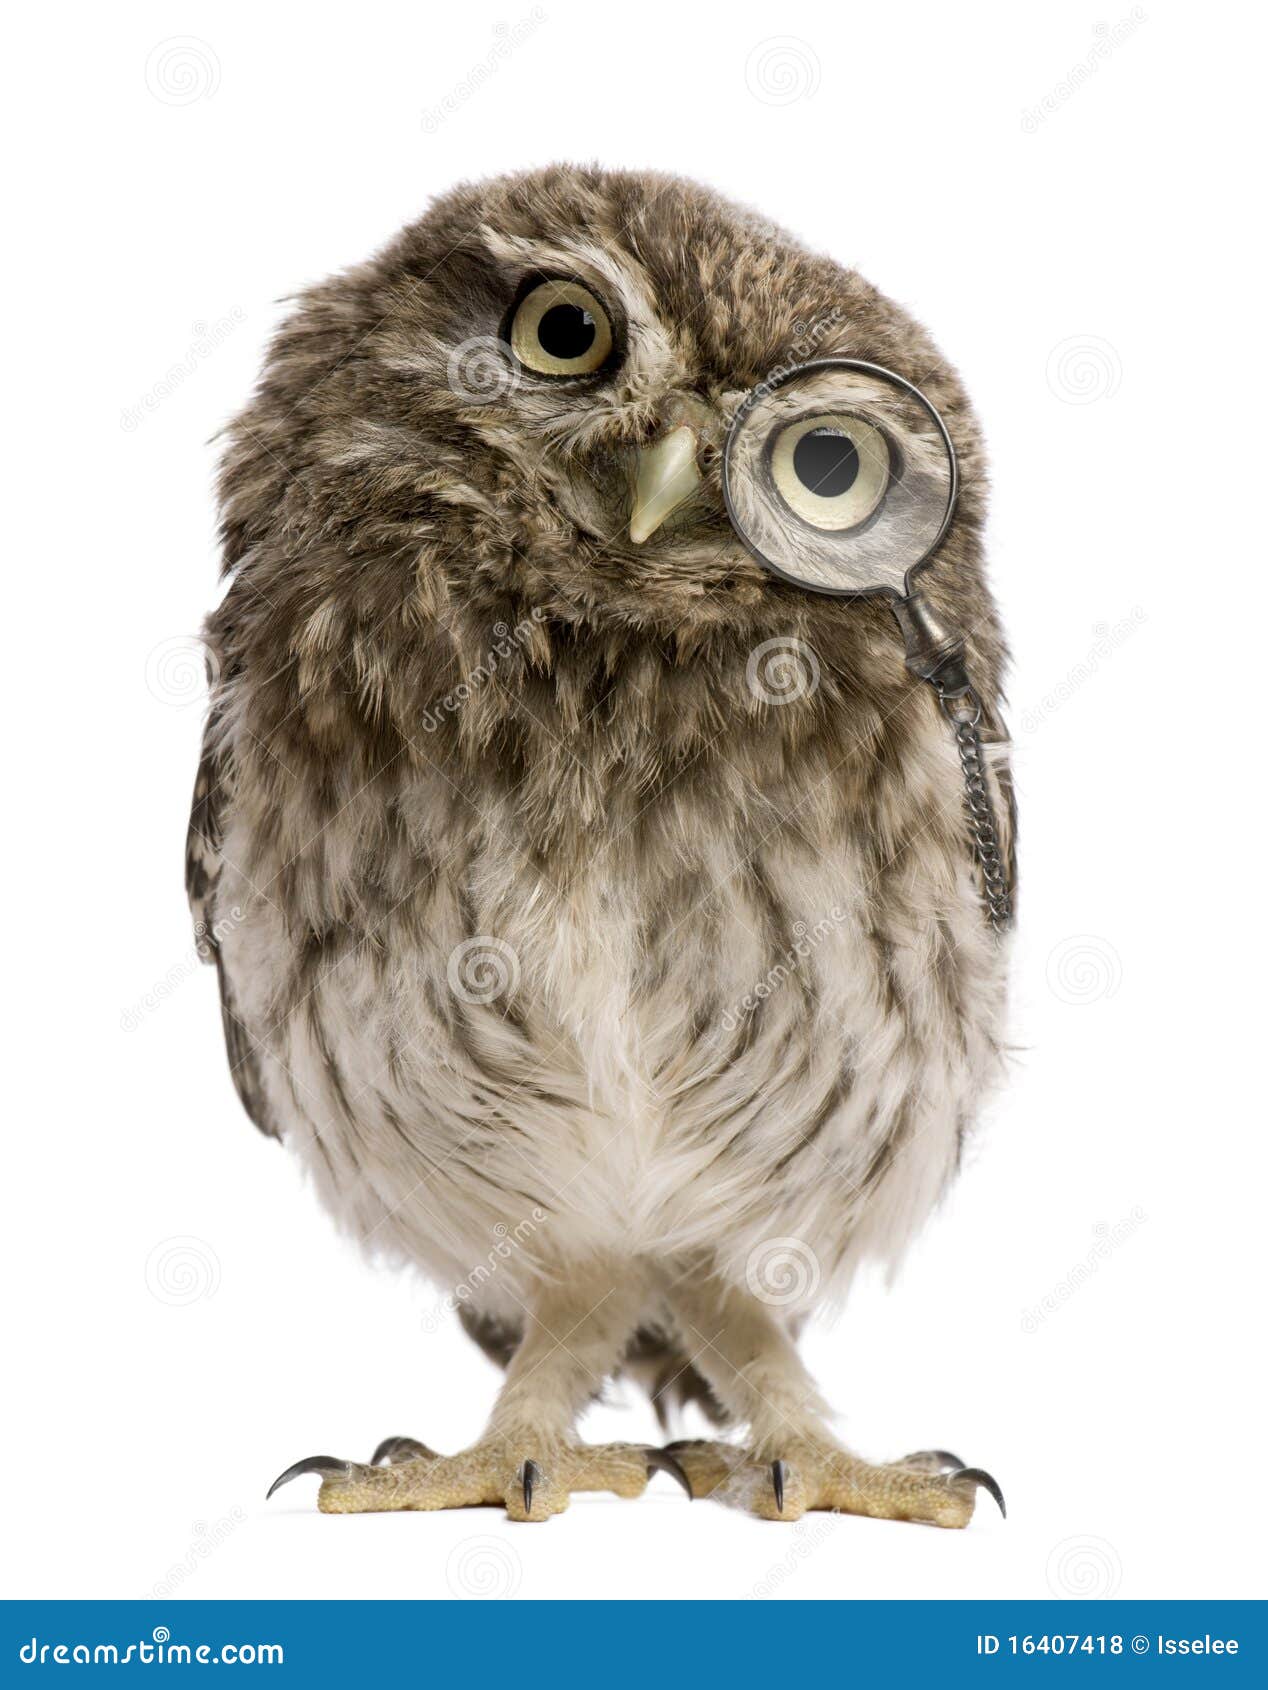 little owl wearing magnifying glass, athene noctua